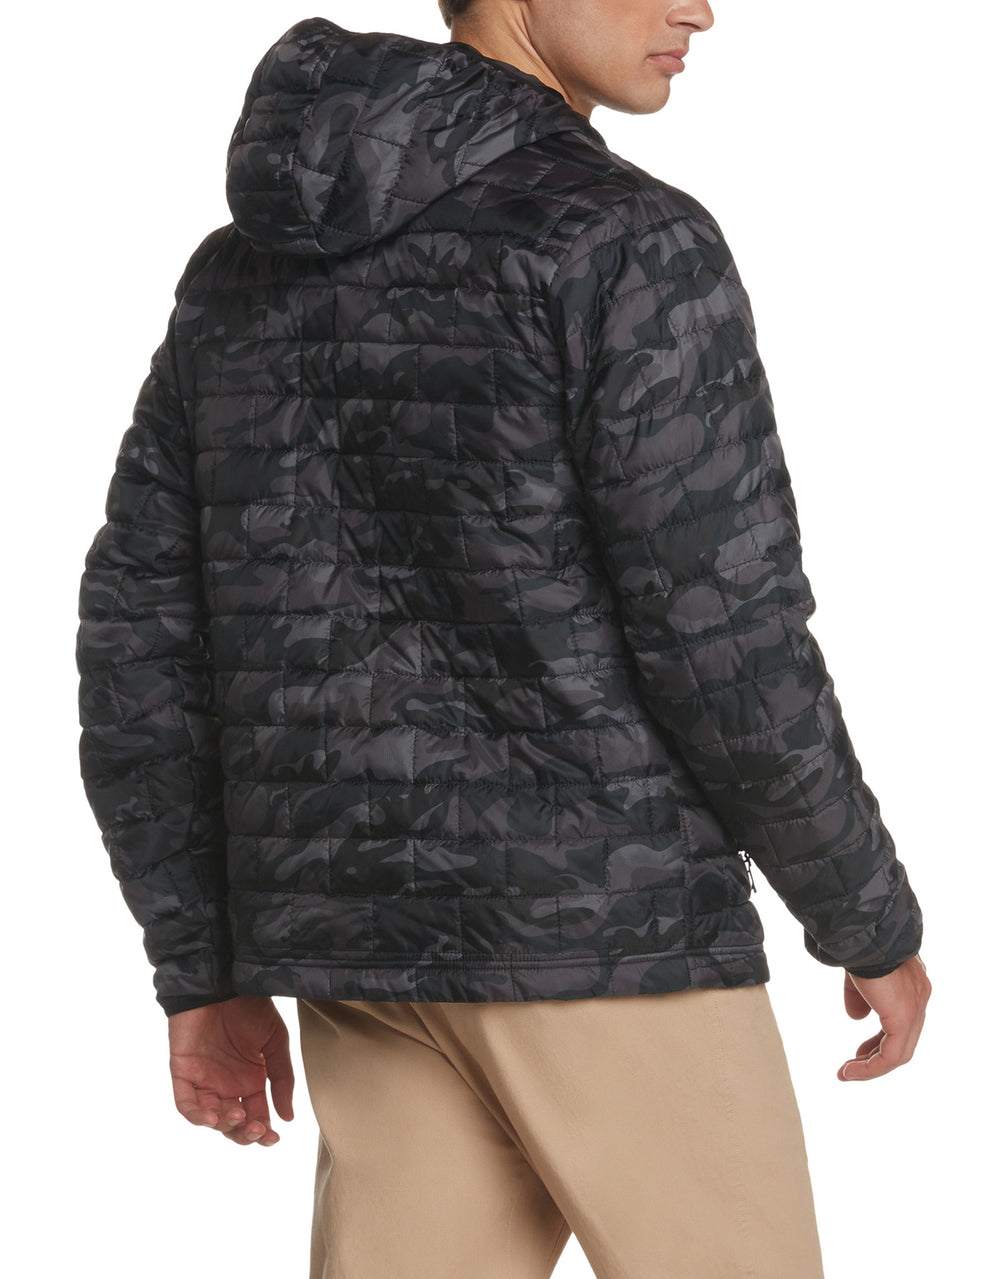 Body Glove Mens Camo Puffer Vest in Midnight Camo, Size Large, Polyester